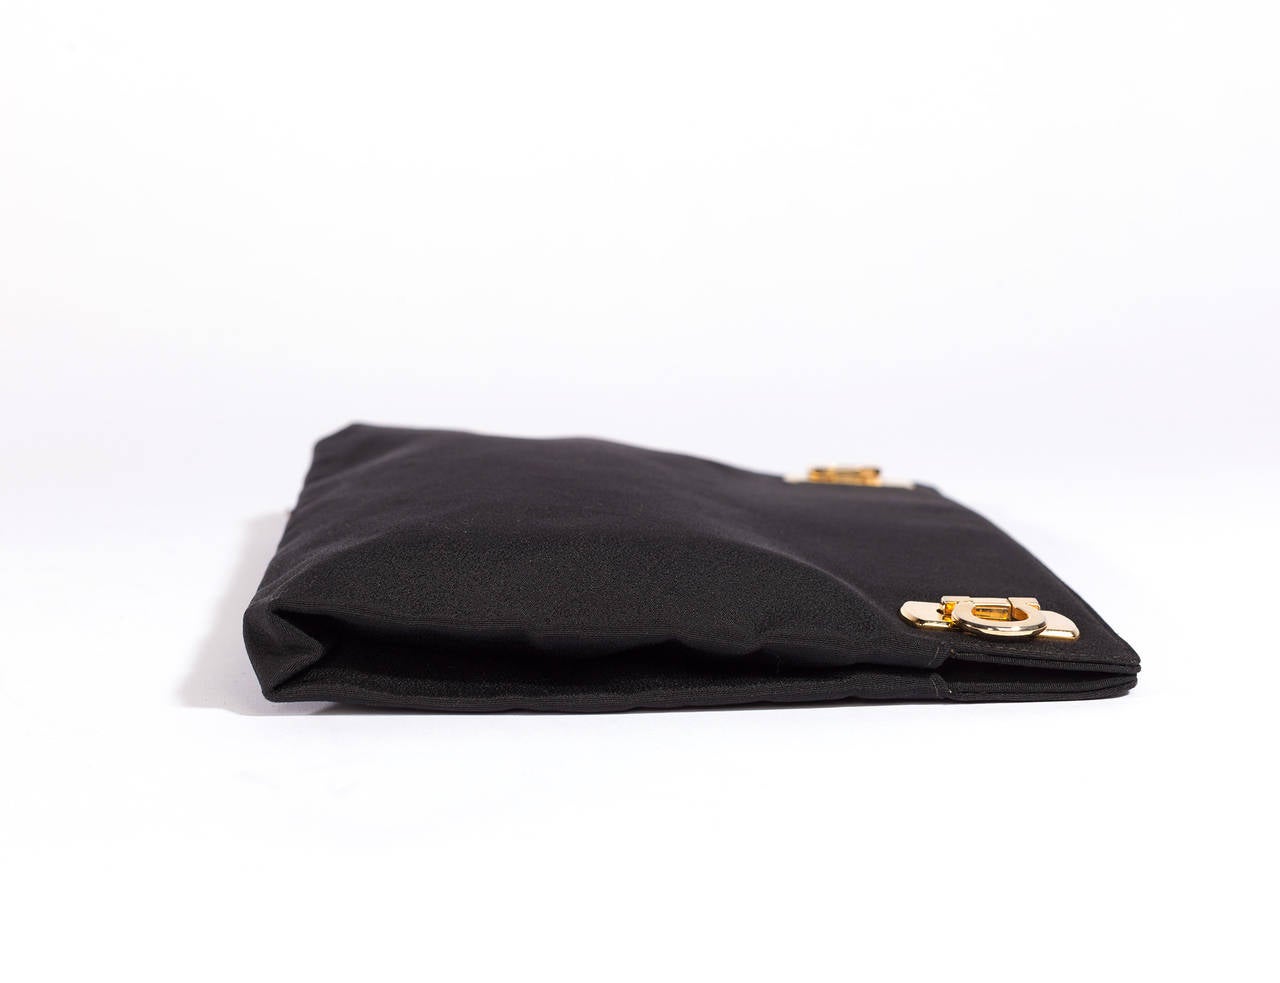 Salvatore Ferragamo Matte Black grosgrain clutch. Clutch has 2 gold clasps and has 1930's feeling, extremely high quality and well executed.